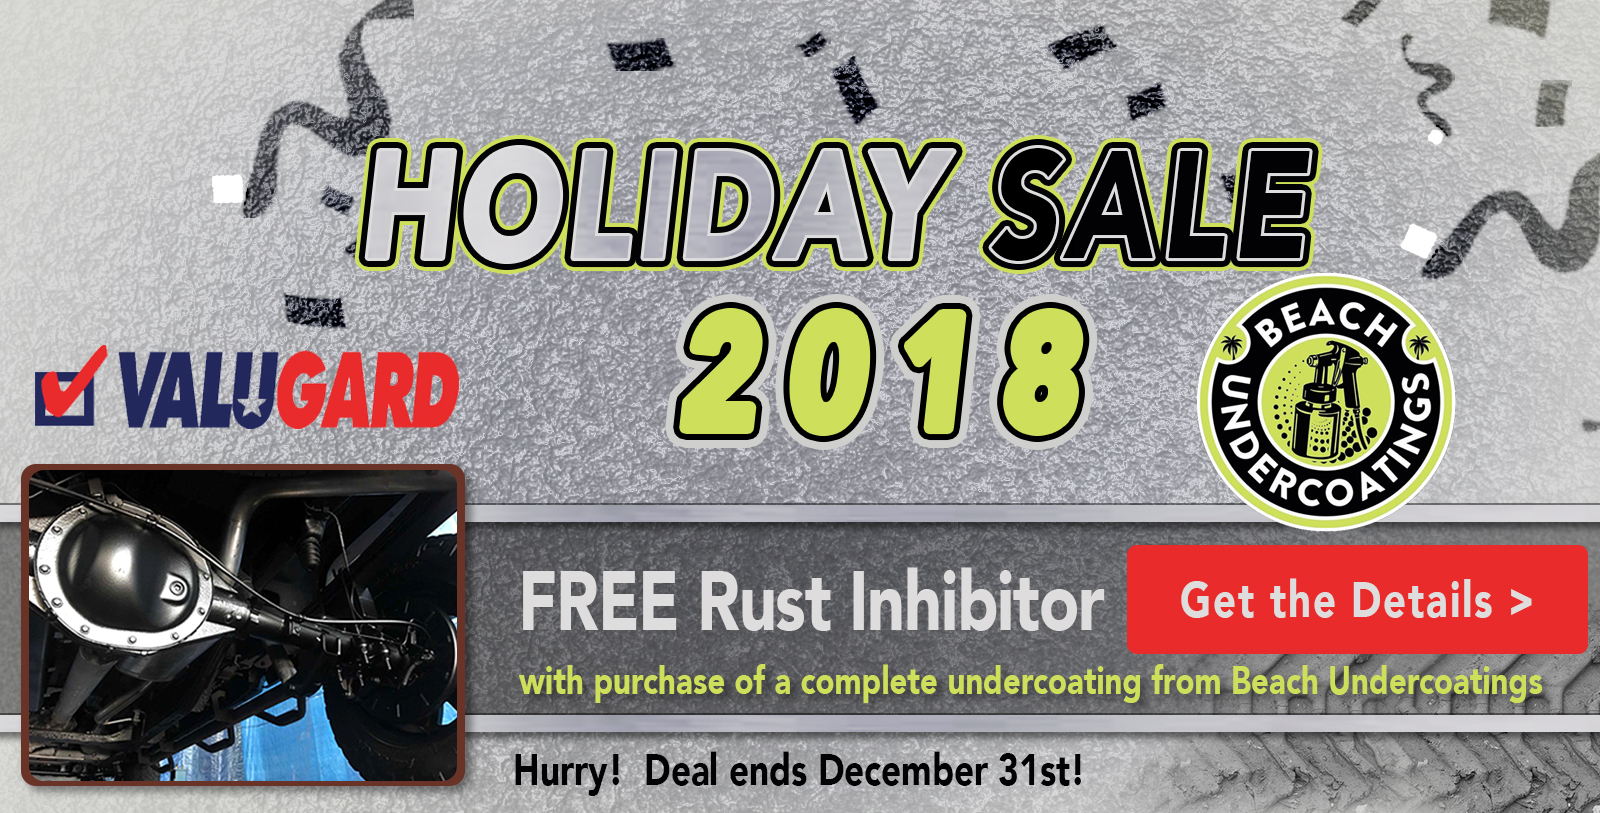 Holiday 2018 Deal: FREE Rust Inhibitor with purchase of a complete undercoating from Beach Undercoatings